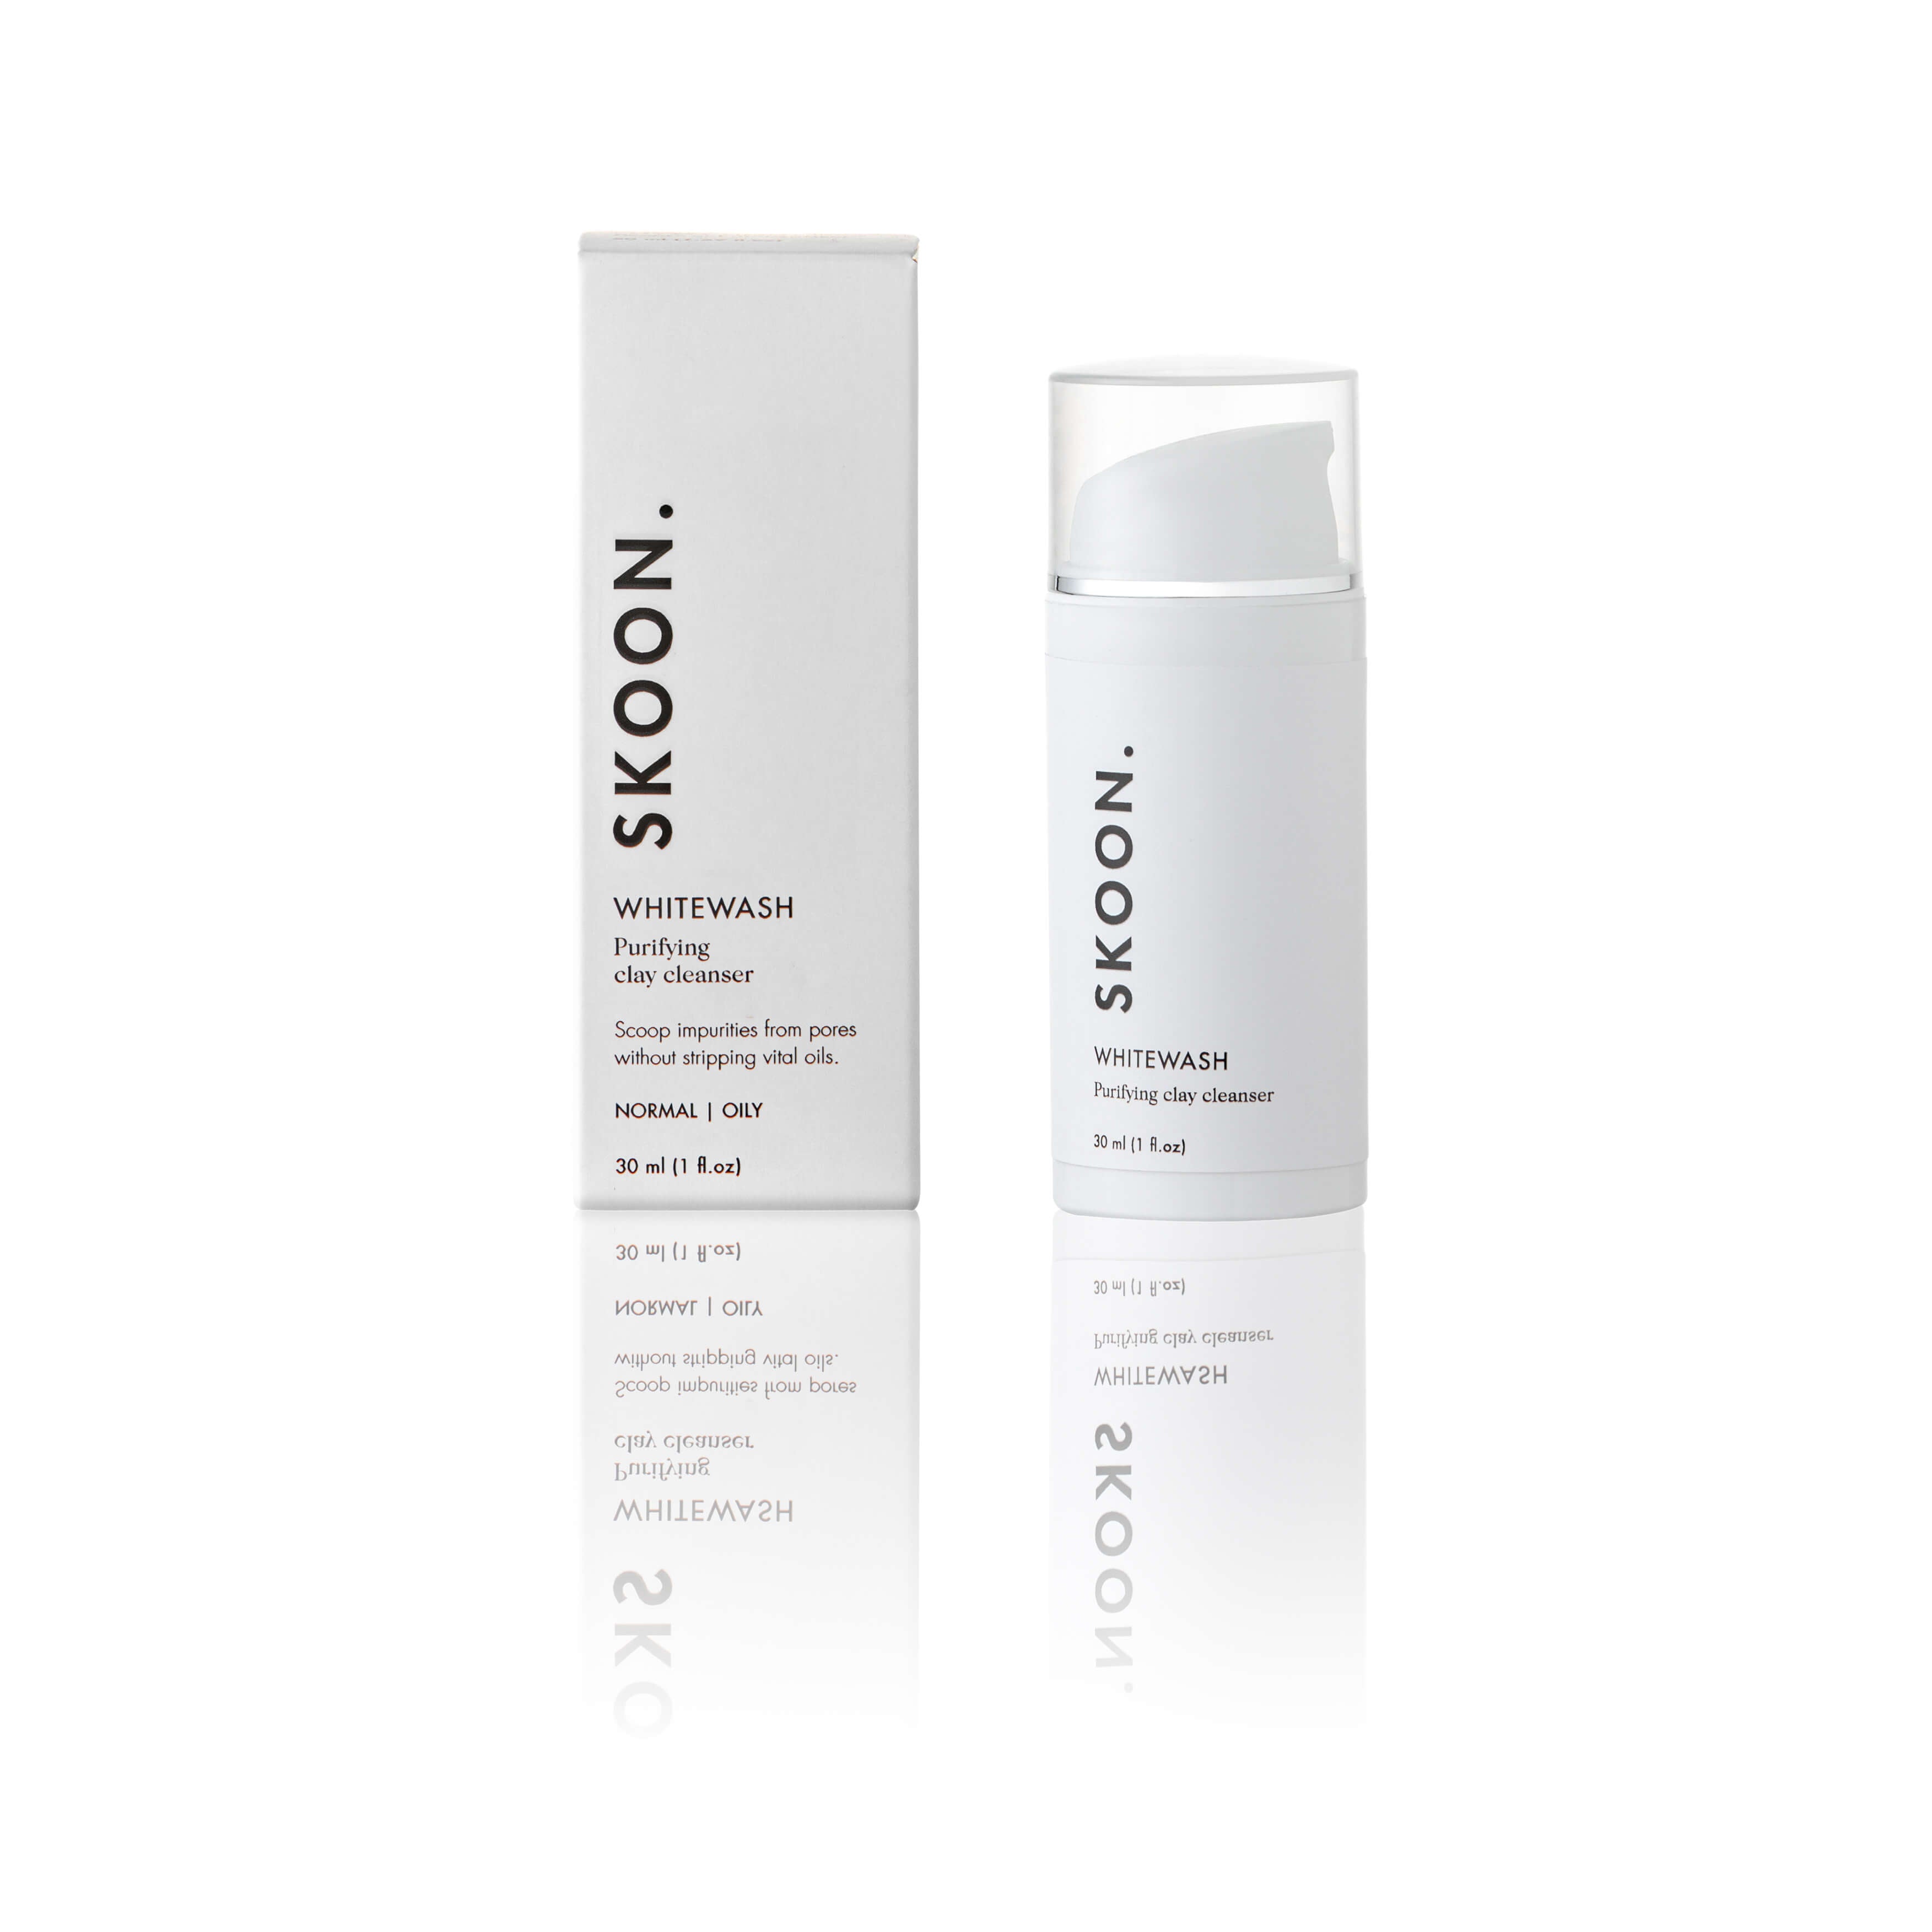 SKOON. WHITEWASH Purifying Clay Cleanser